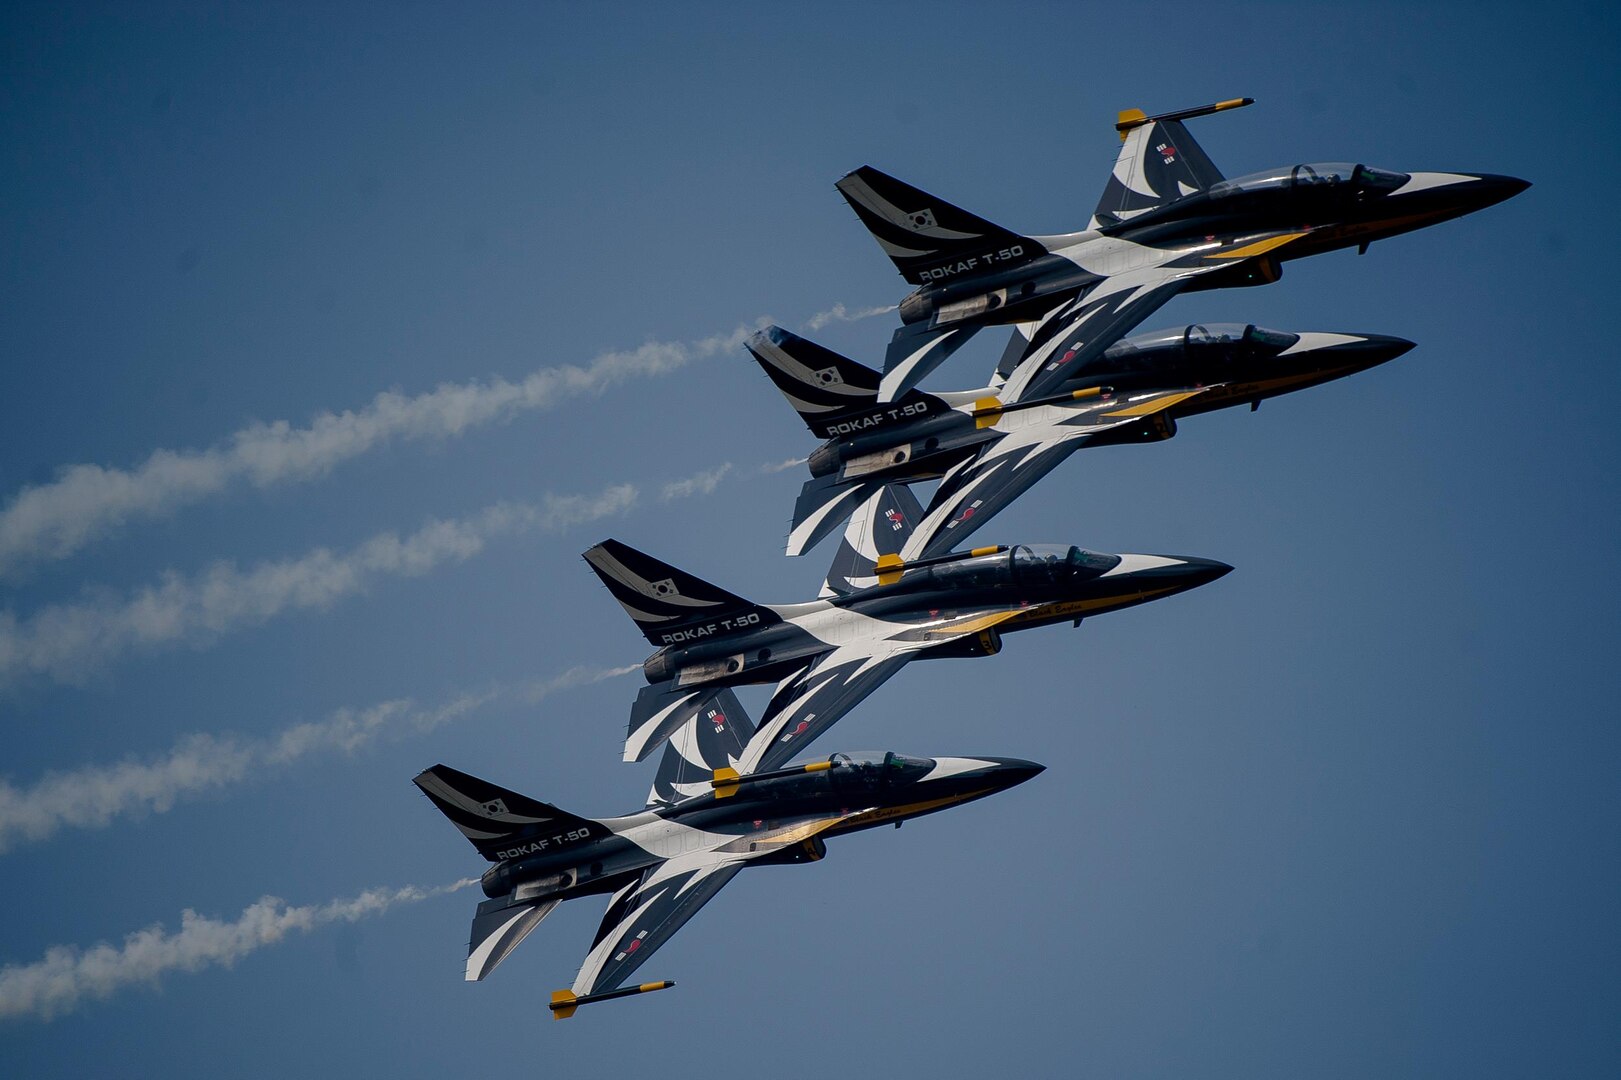 Republic of Korea air force Black Eagles fly in formation during Air Power Day 2016 on Osan Air Base, Republic of Korea, Sept. 25, 2016. Air Power Day was a two-day event that highlighted the partnership between the Republic of Korea and the U.S. military.